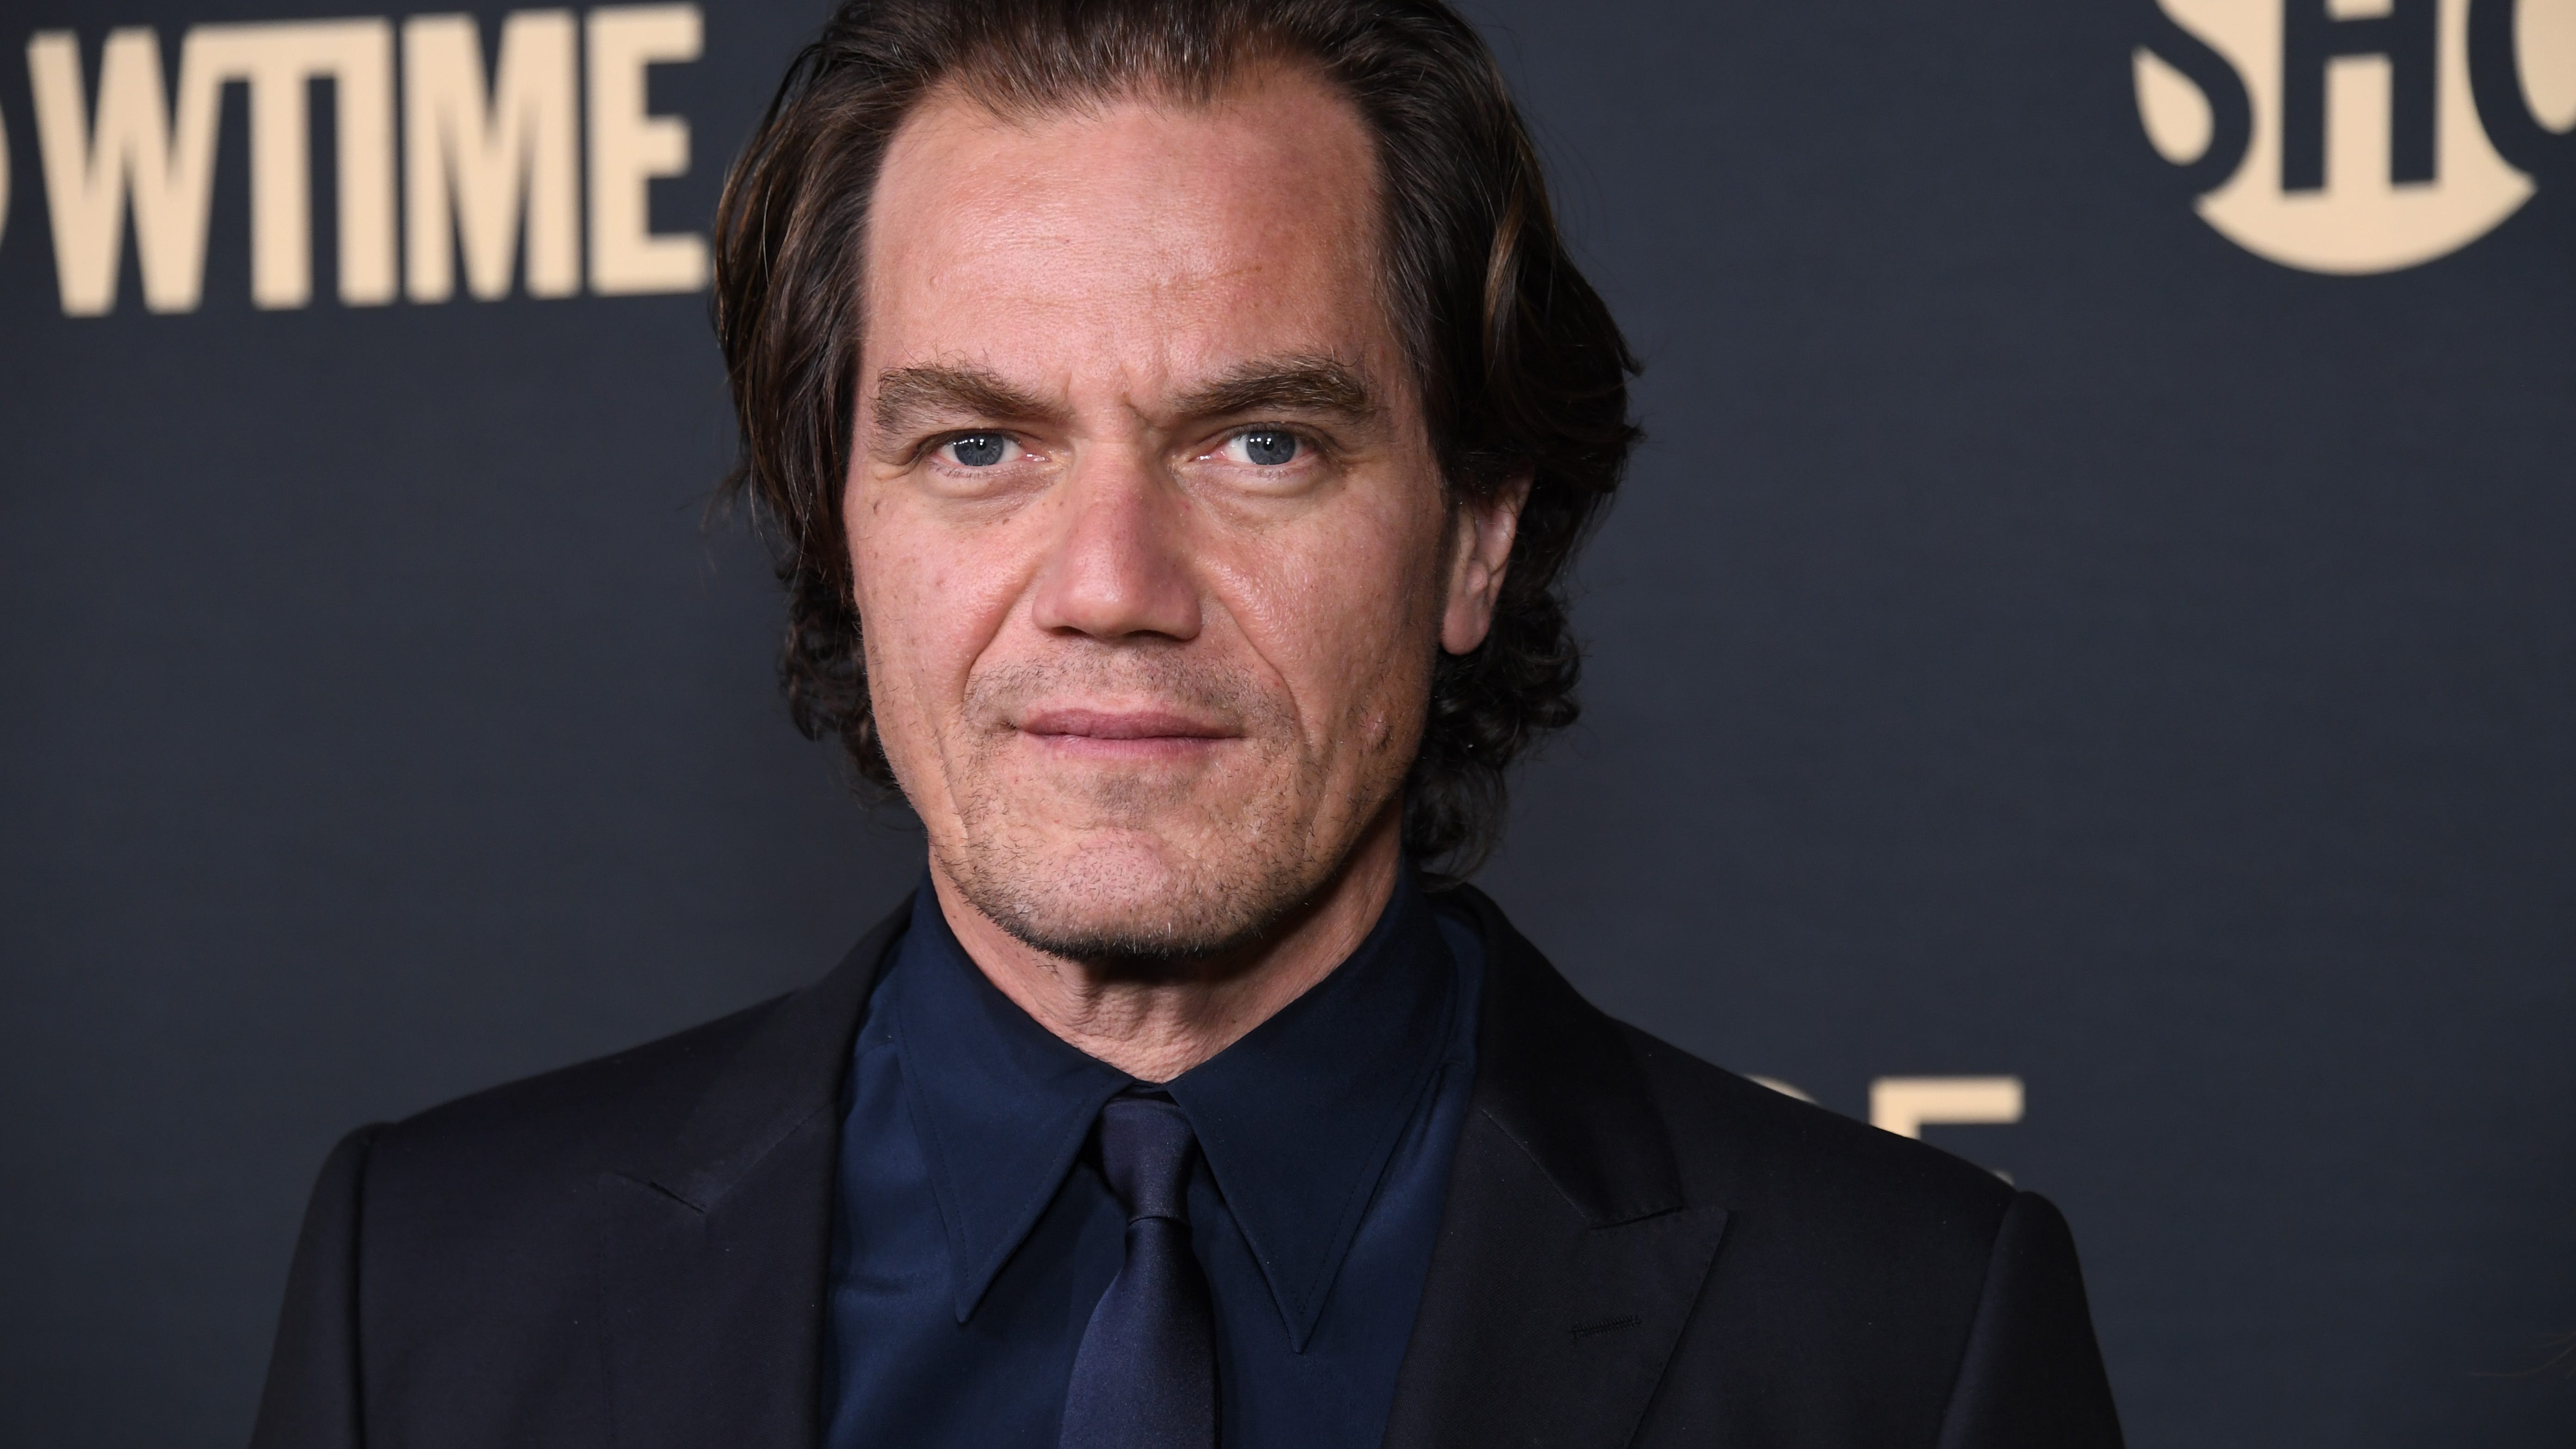 Michael Shannon says it's "difficult" to discuss working with Ezra Miller on "The Flash" amid their mental health issues.